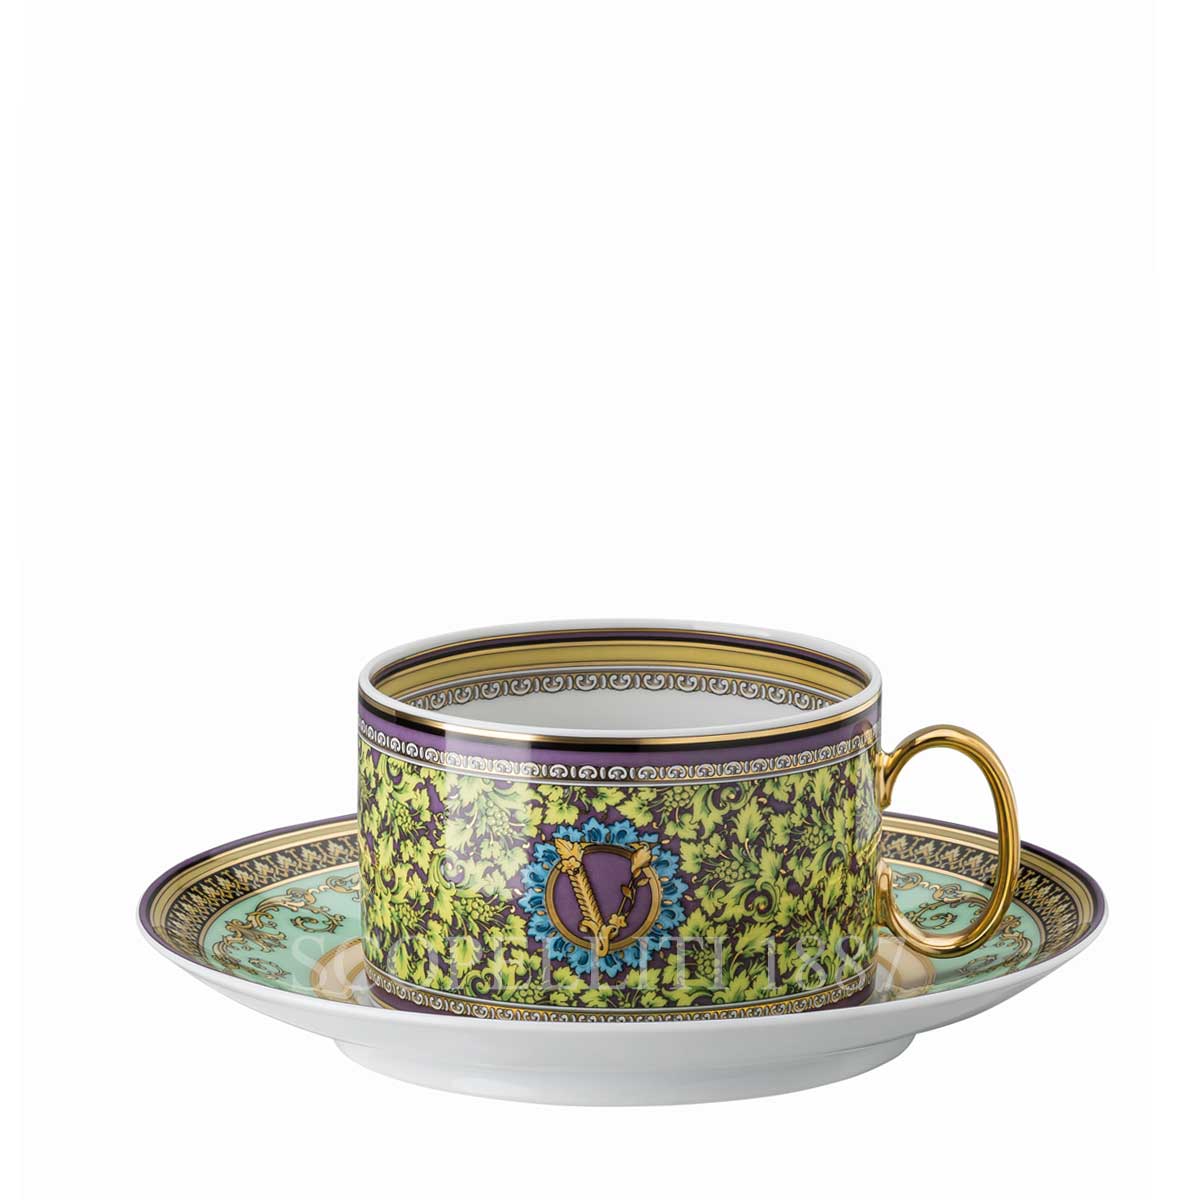 Versace Barocco Mosaic NEW 5 Piece place Setting